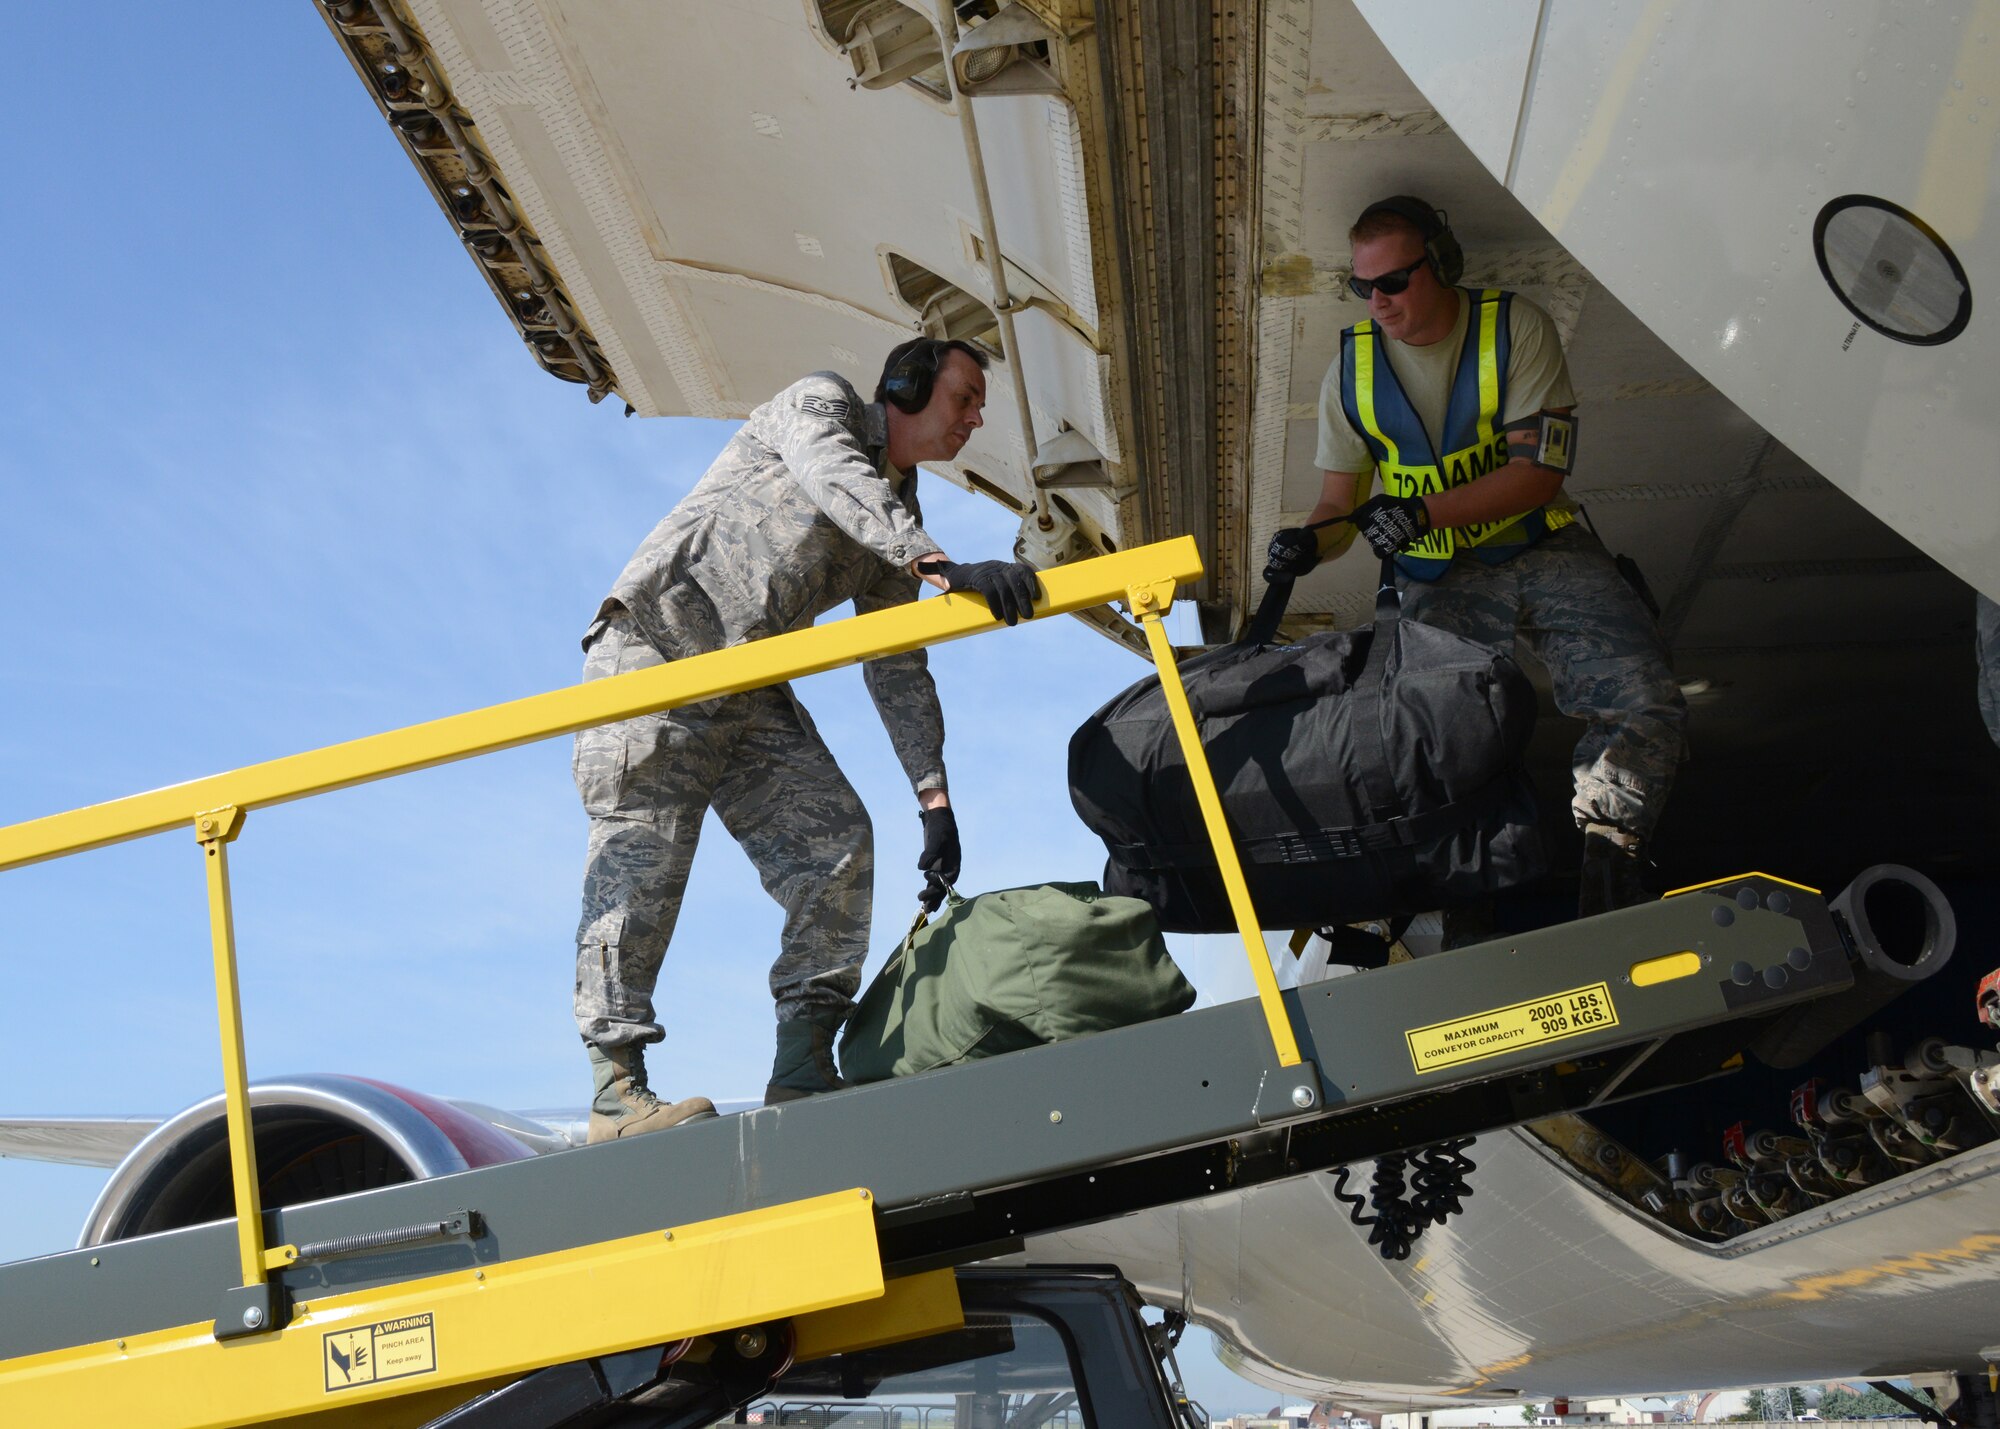 Tech Sgt. Steve Bishop, 175th Logistics Readiness Squadron, unloads bags from a Boeing 767 at Aviano Air Base, Italy, June 4, 2014. Nearly 50 members of the Maryland Air National Guard deployed to Italy to train with their active duty counterparts. (U.S. Air National Guard photo by MSgt. Gareth Buckland/Released)